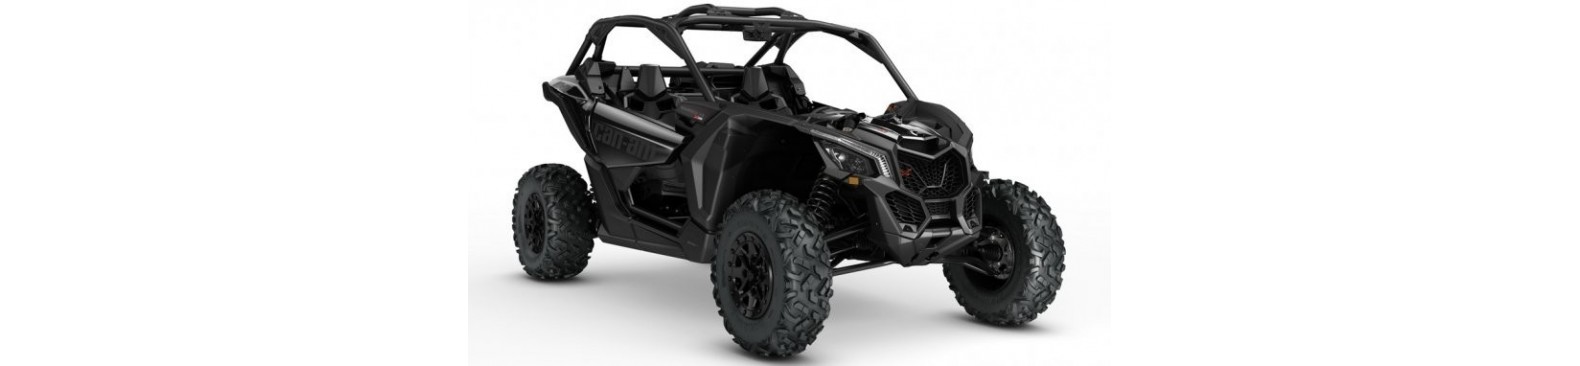 Parts and Accessories for your Can-Am Maverick X3 side x side